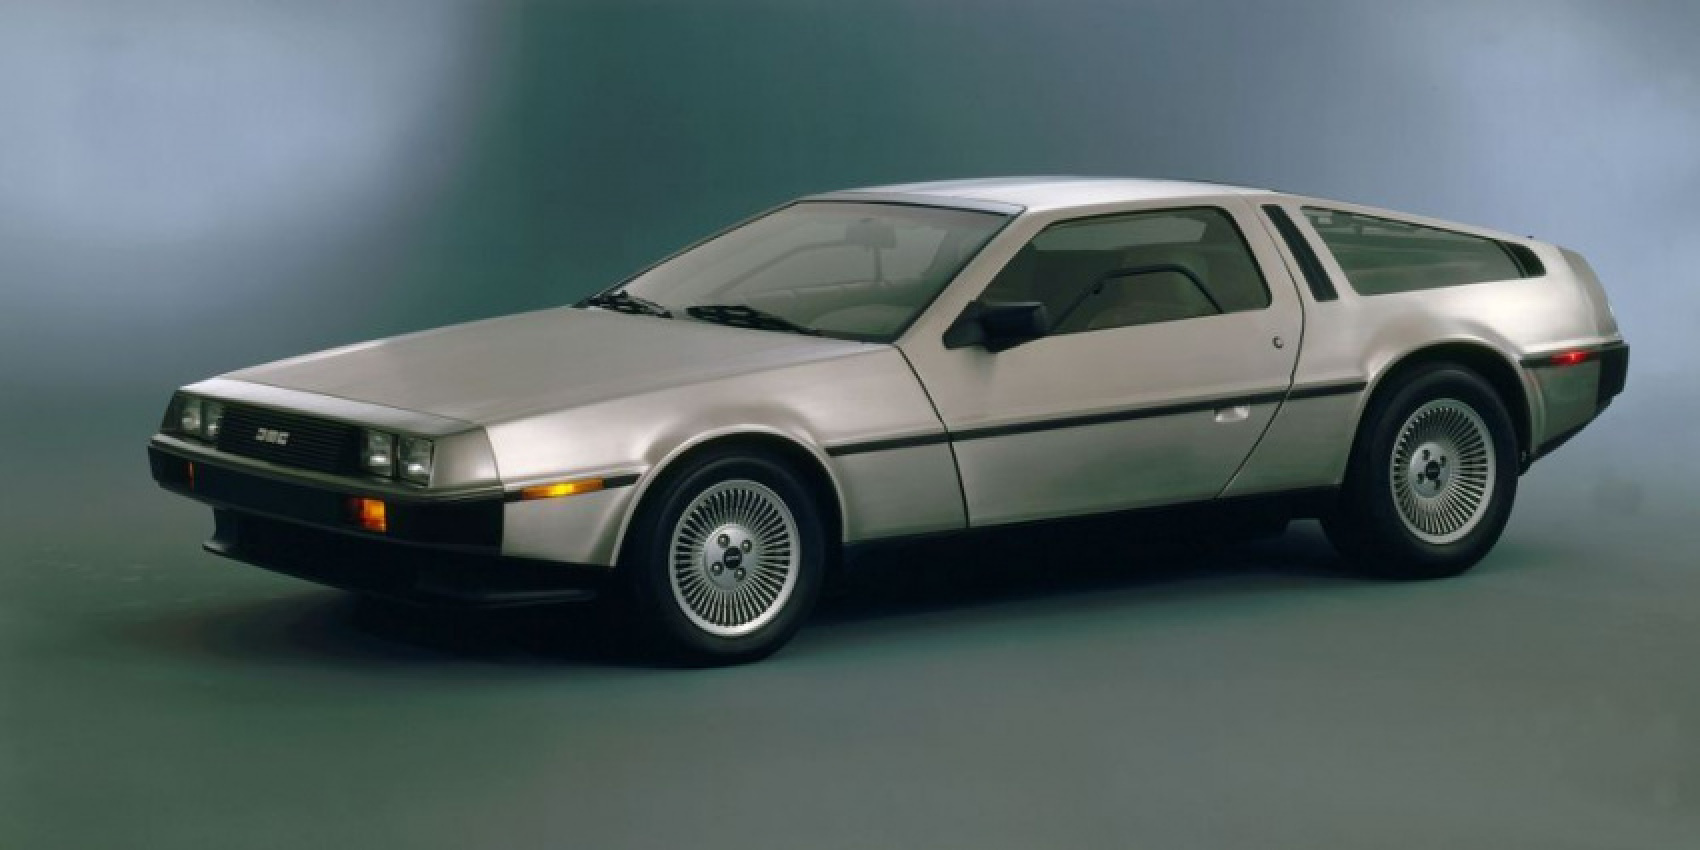 autos, cars, delorean, auto news, back to the future, dcm-12, delorean ev, electric vehicle, italdesign, tesla, williams advanced engineering, the delorean has just returned from the future and it's future self is an electric car